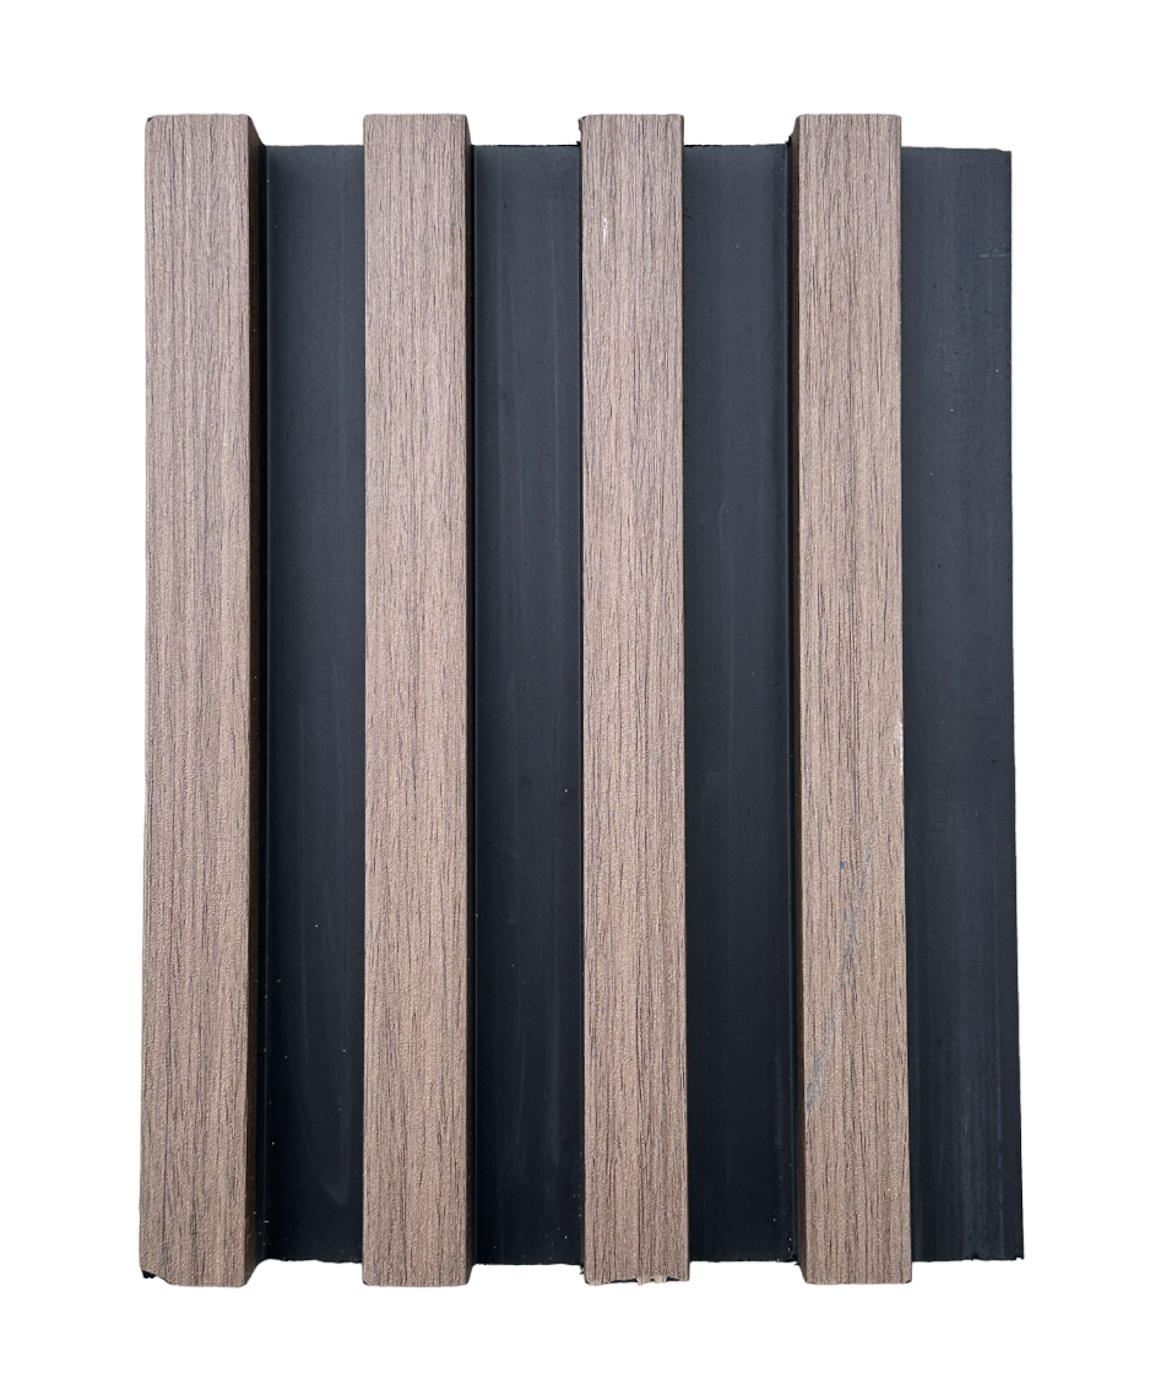 Interior Accent Wall Panels Two Tone Brown / Black Decorative Wood Look